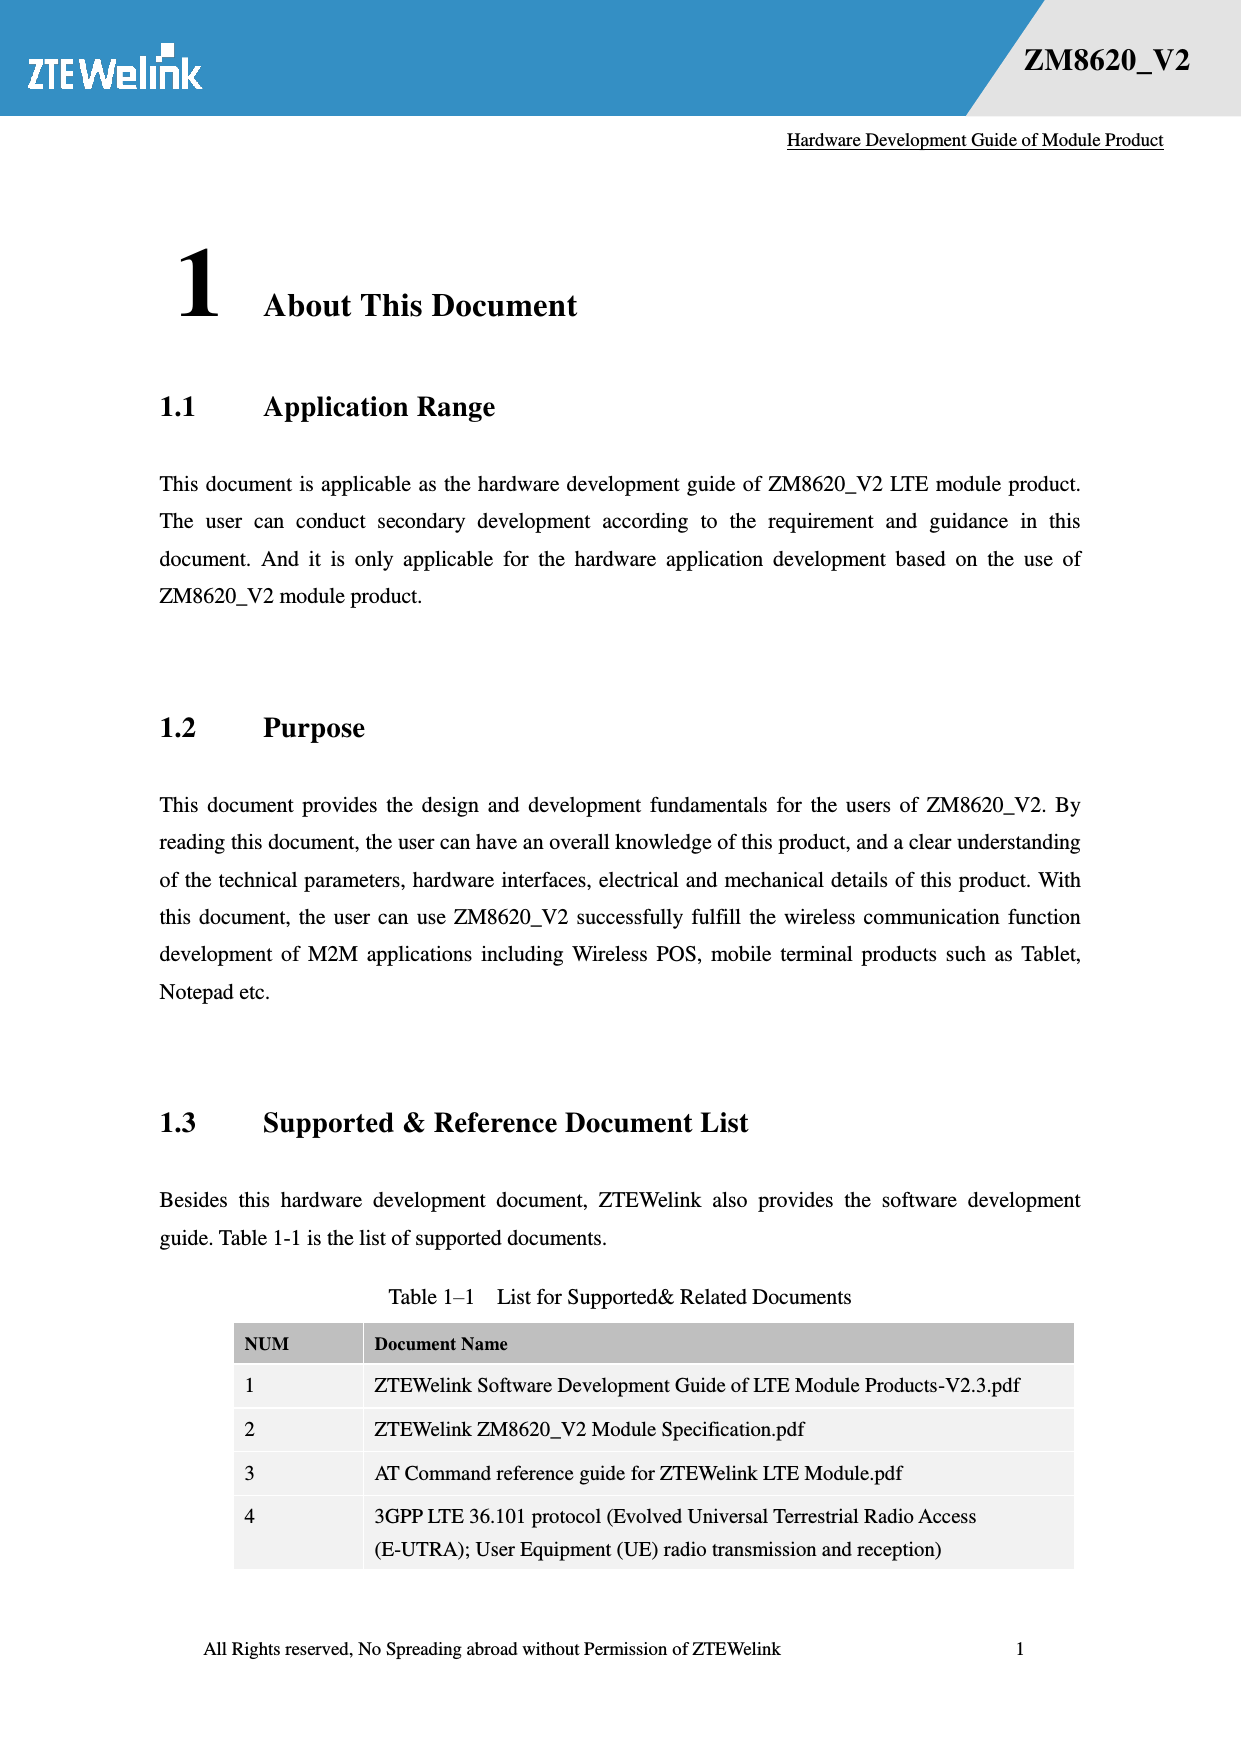   Hardware Development Guide of Module Product  All Rights reserved, No Spreading abroad without Permission of ZTEWelink              1 错误！未找到用源。    ZM8620_V2 1 About This Document 1.1 Application Range This document is applicable as the hardware development guide of ZM8620_V2 LTE module product. The  user  can  conduct  secondary  development  according  to  the  requirement  and  guidance  in  this document.  And  it  is  only  applicable  for  the  hardware  application  development  based  on  the  use  of ZM8620_V2 module product.  1.2 Purpose This  document  provides  the  design  and  development  fundamentals  for  the  users  of  ZM8620_V2.  By reading this document, the user can have an overall knowledge of this product, and a clear understanding of the technical parameters, hardware interfaces, electrical and mechanical details of this product. With this document, the user  can use  ZM8620_V2  successfully fulfill the  wireless communication function development  of  M2M  applications  including  Wireless  POS,  mobile  terminal  products  such  as  Tablet, Notepad etc.  1.3 Supported &amp; Reference Document List Besides  this  hardware  development  document,  ZTEWelink  also  provides  the  software  development guide. Table 1-1 is the list of supported documents. Table 1–1  List for Supported&amp; Related Documents NUM Document Name 1 ZTEWelink Software Development Guide of LTE Module Products-V2.3.pdf 2 ZTEWelink ZM8620_V2 Module Specification.pdf 3 AT Command reference guide for ZTEWelink LTE Module.pdf 4 3GPP LTE 36.101 protocol (Evolved Universal Terrestrial Radio Access (E-UTRA); User Equipment (UE) radio transmission and reception) 